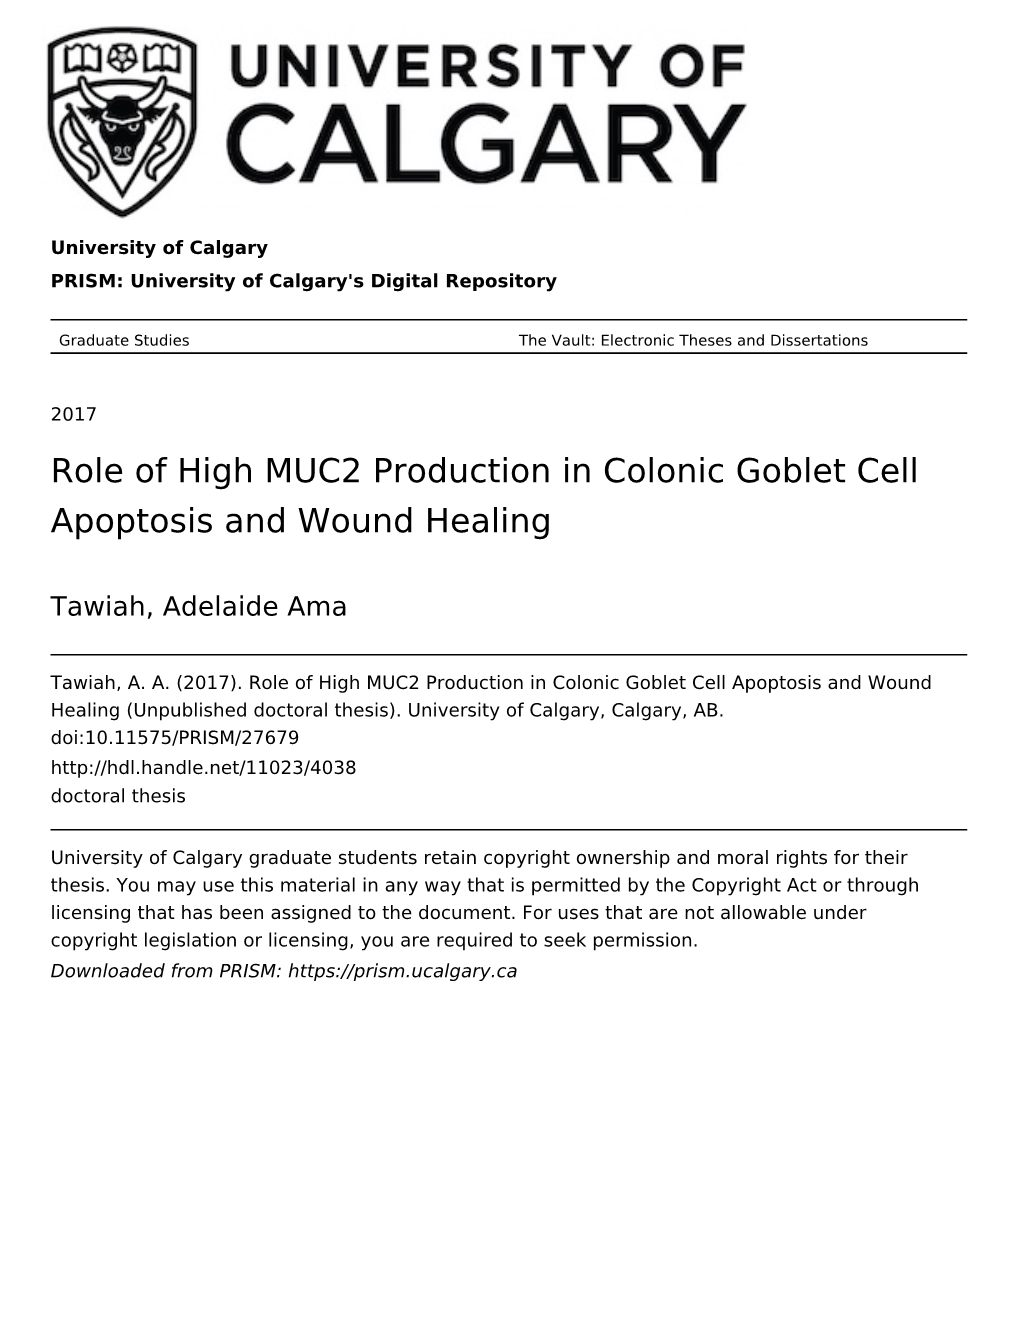 Role of High MUC2 Production in Colonic Goblet Cell Apoptosis and Wound Healing